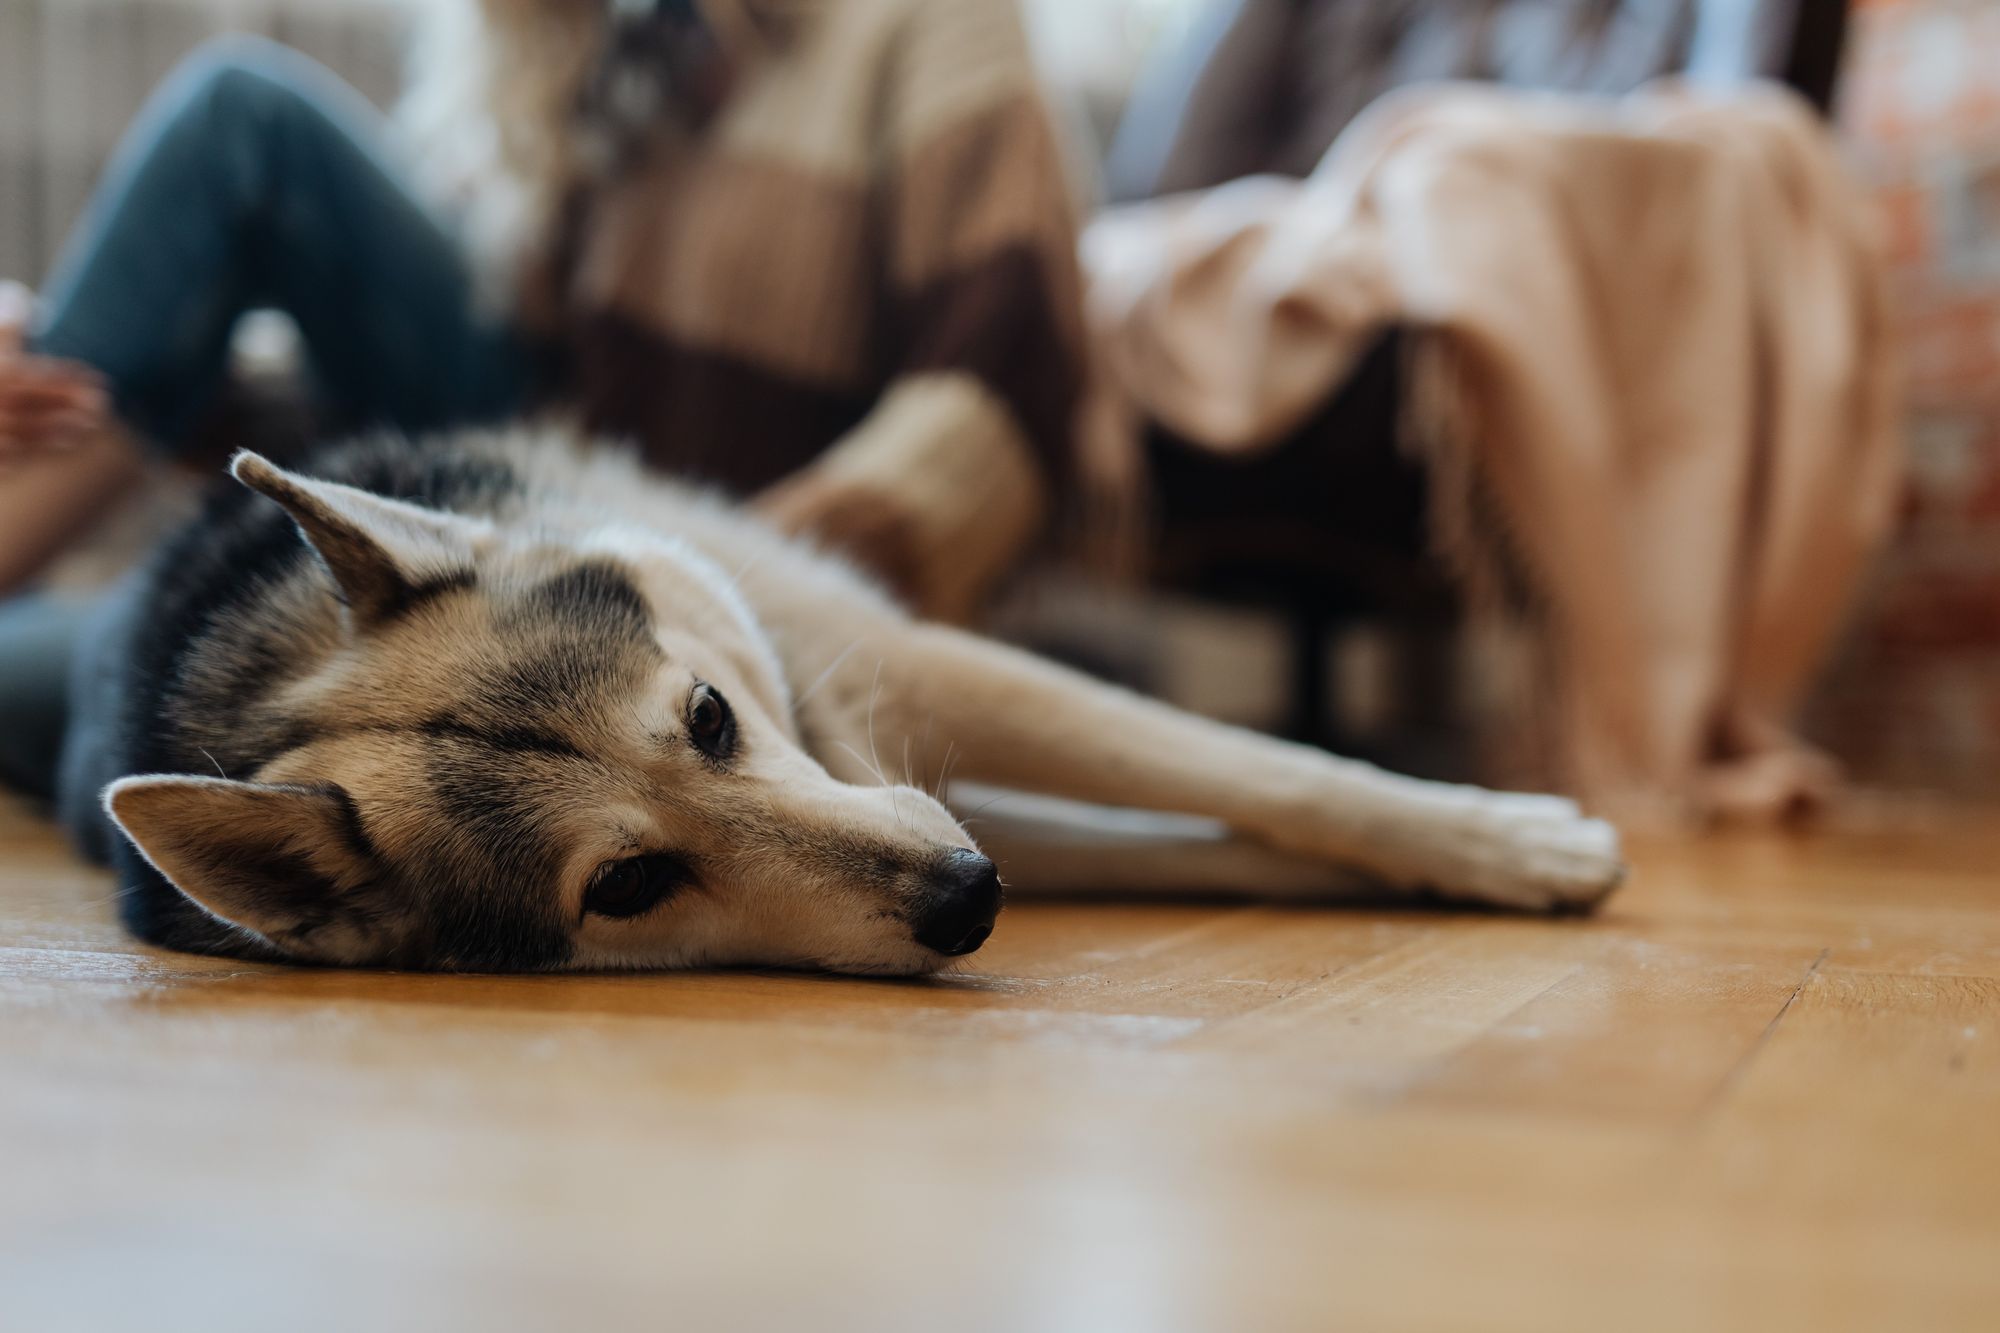 A dog lying on a wooden floor.